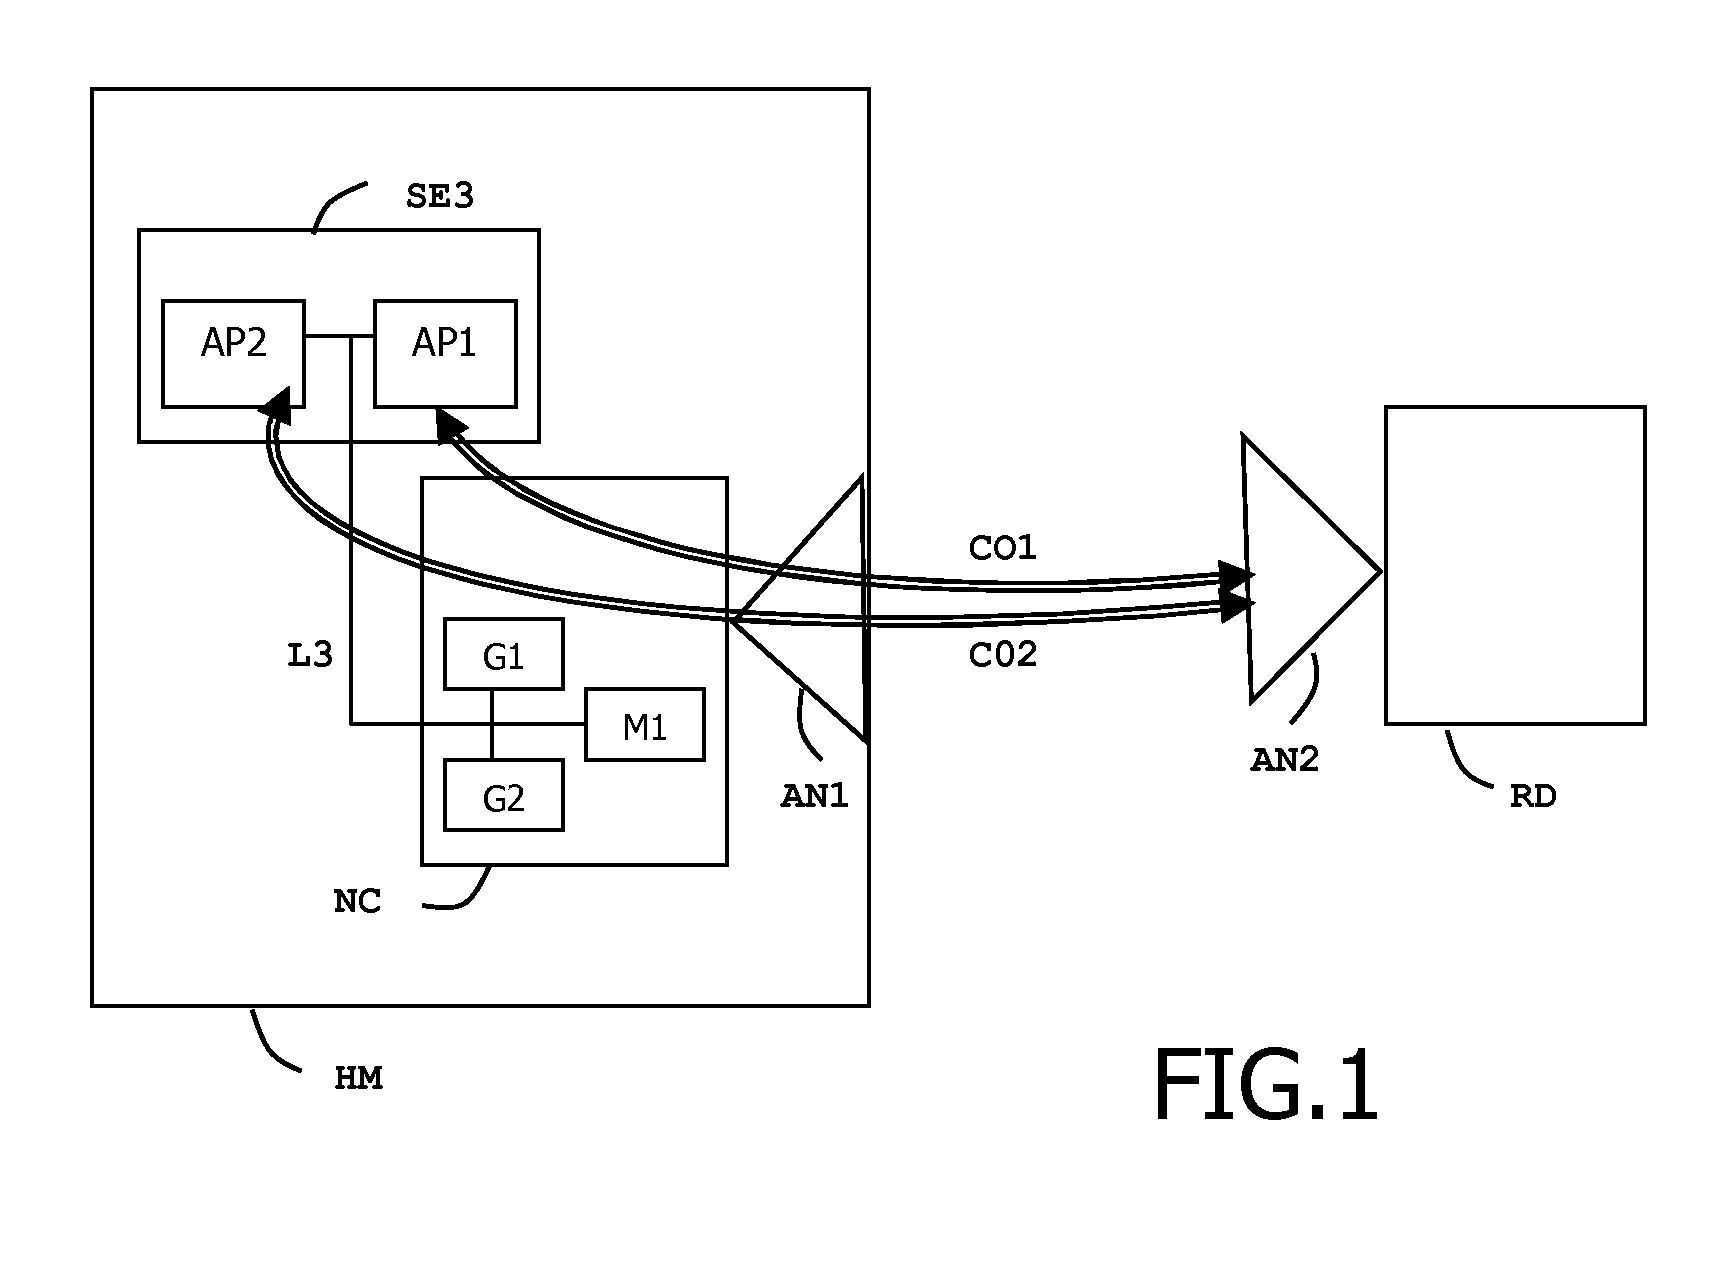 Method of managing communications with a NFC controller